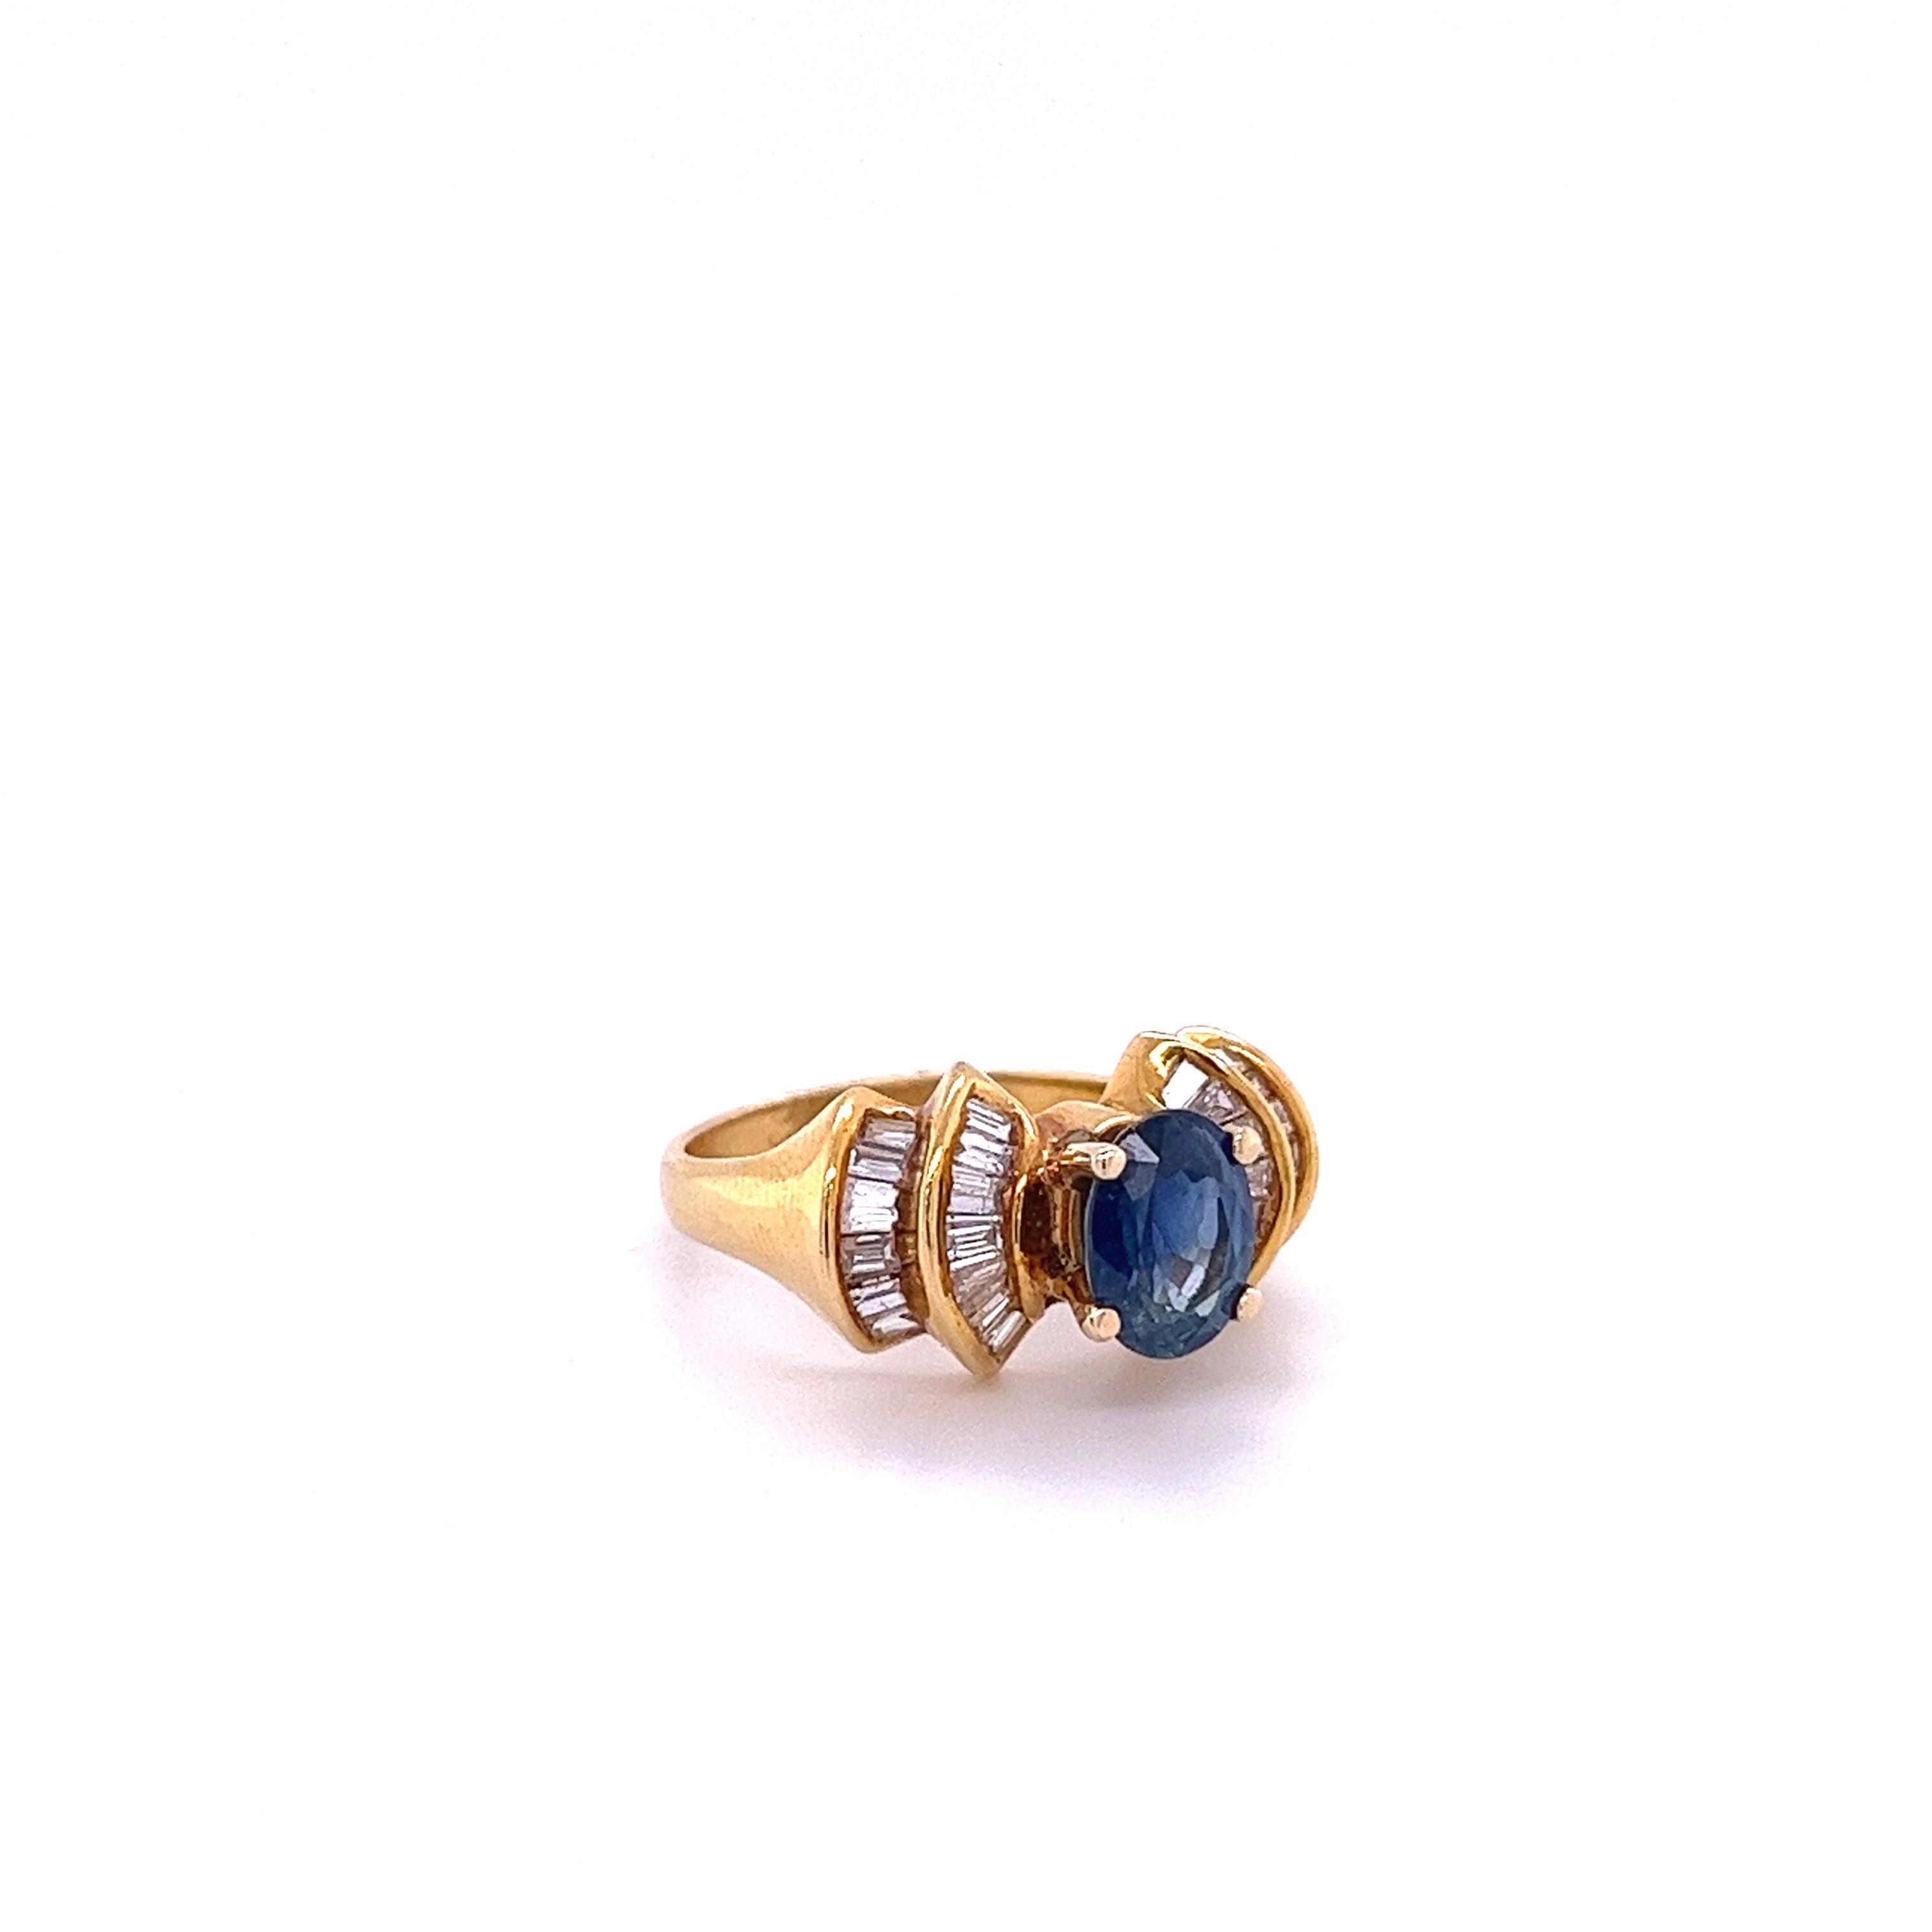 1.19-carat oval cut Blue Sapphire set with 0.66 carats in baguette-cut diamond accents in a 14k yellow gold ring. A stunning Art Deco-themed ring with symmetrically patterned baguette diamonds. 

Polished finish for a long-lasting shine. Waterproof,